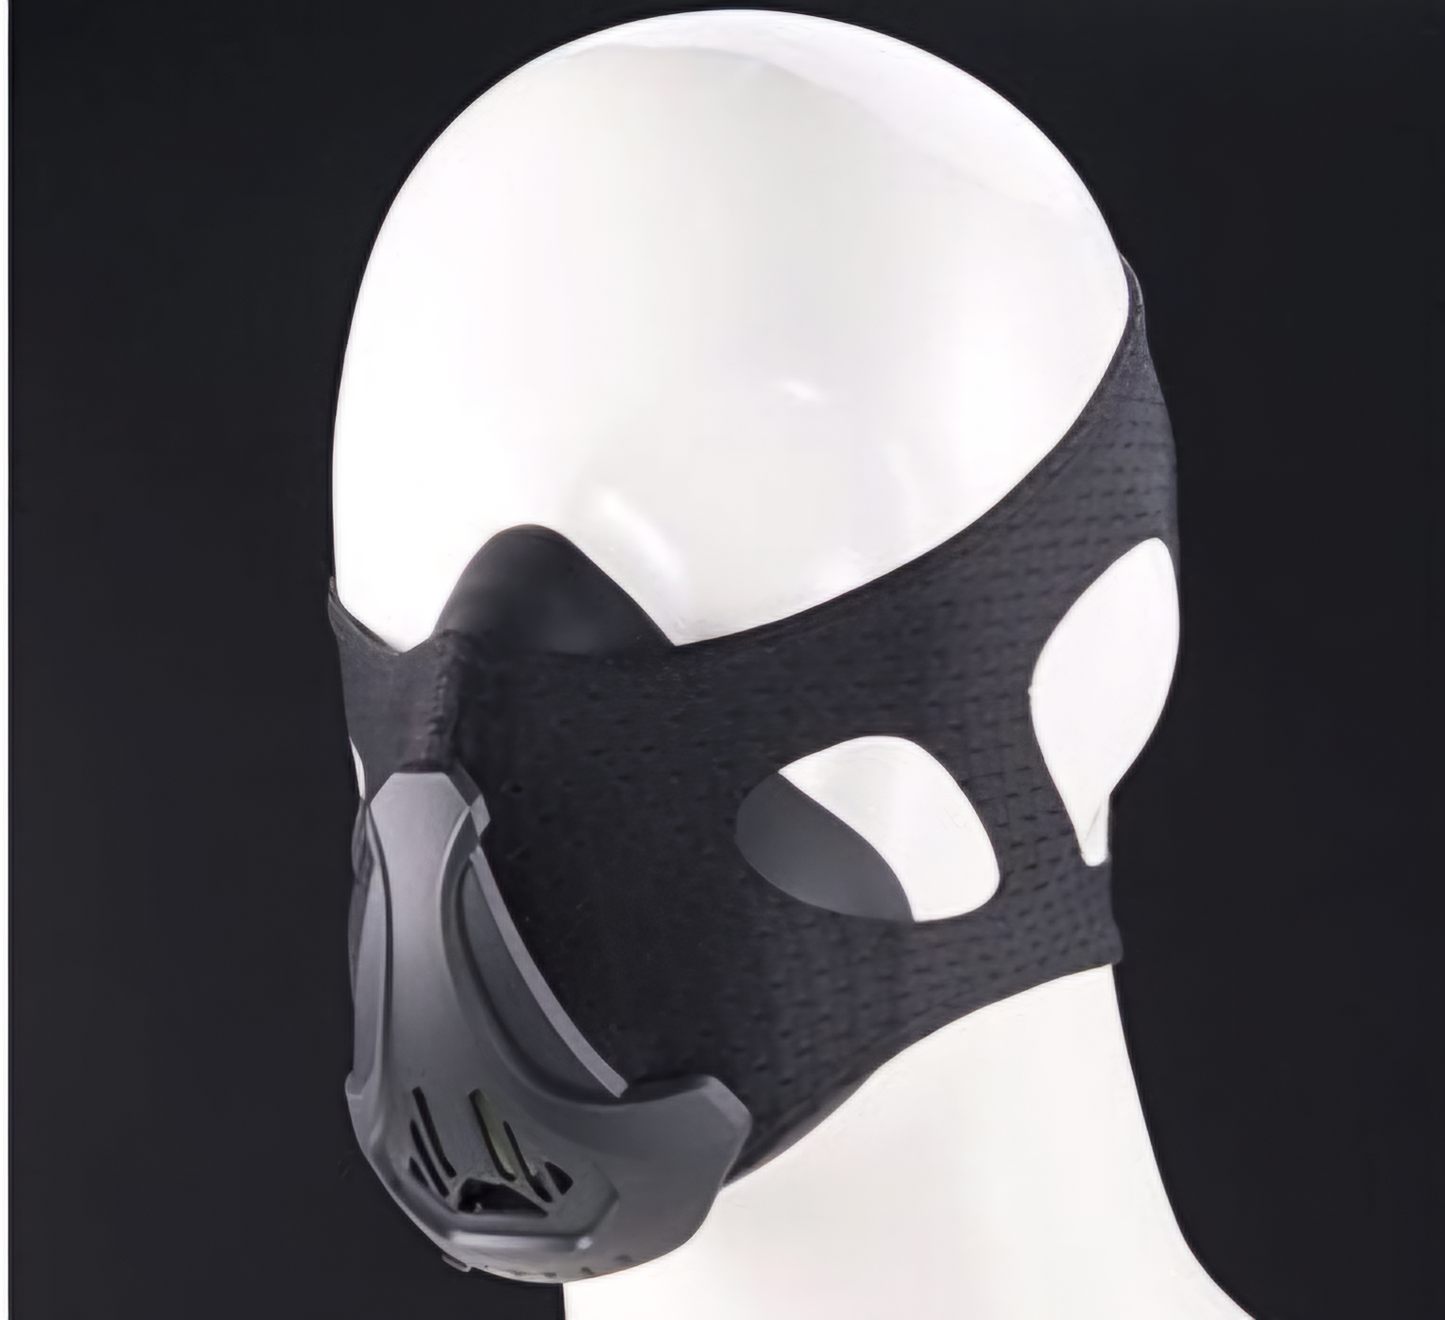 Sport Masks for Fitness Running Training High Altitude Face Mask for Resistance,Cardio,Endurance Mask for Fitness. Sport Mask.